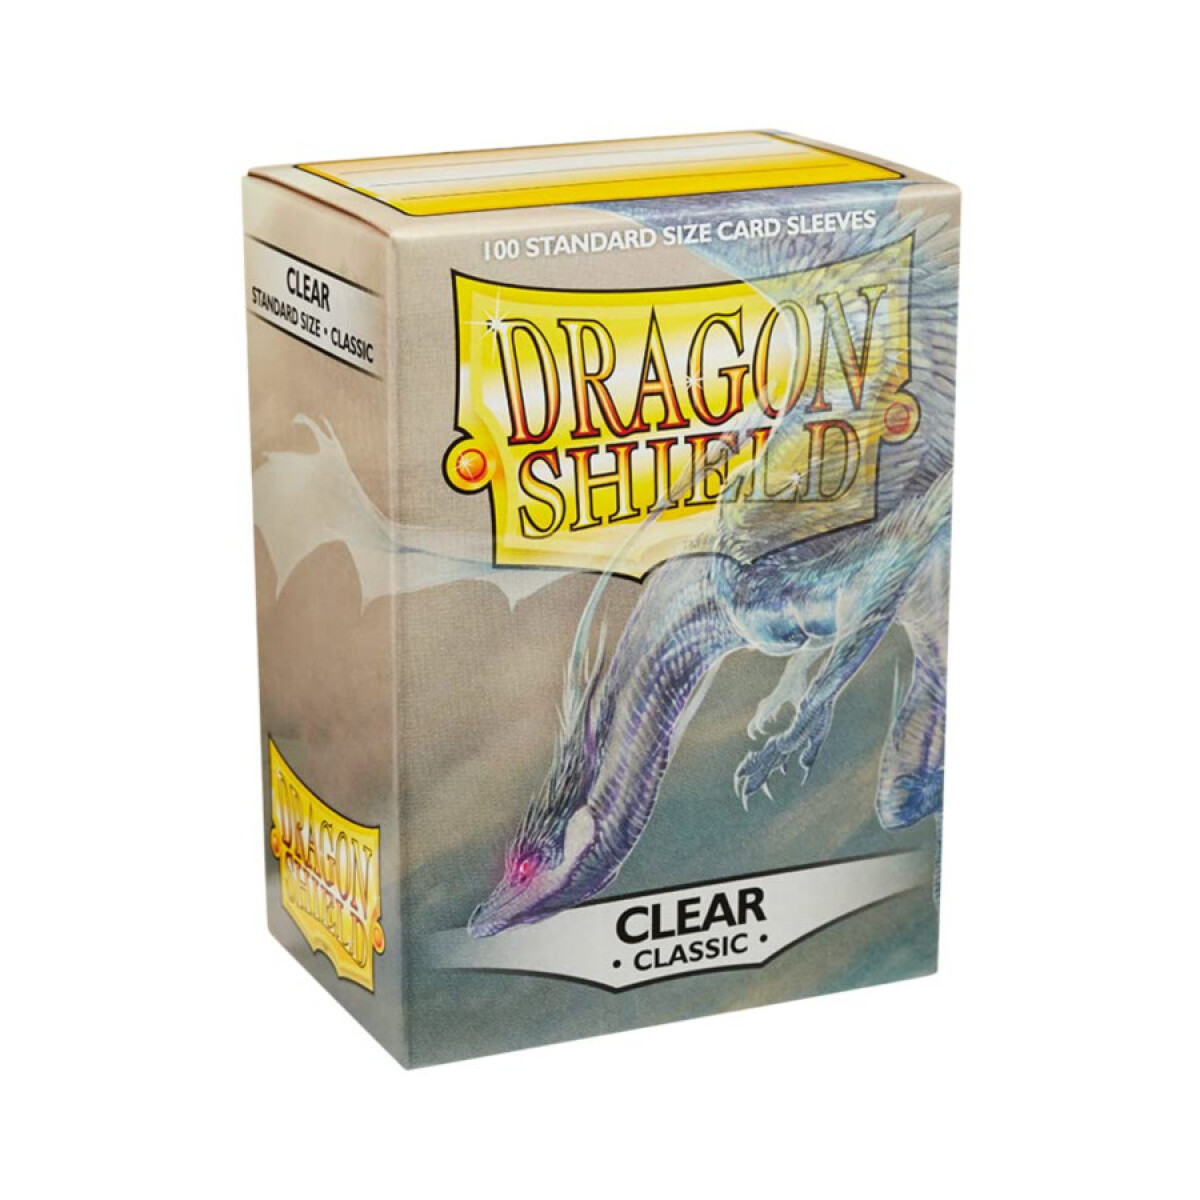 Dragon Shield Classic Clear 100 Sleeves 